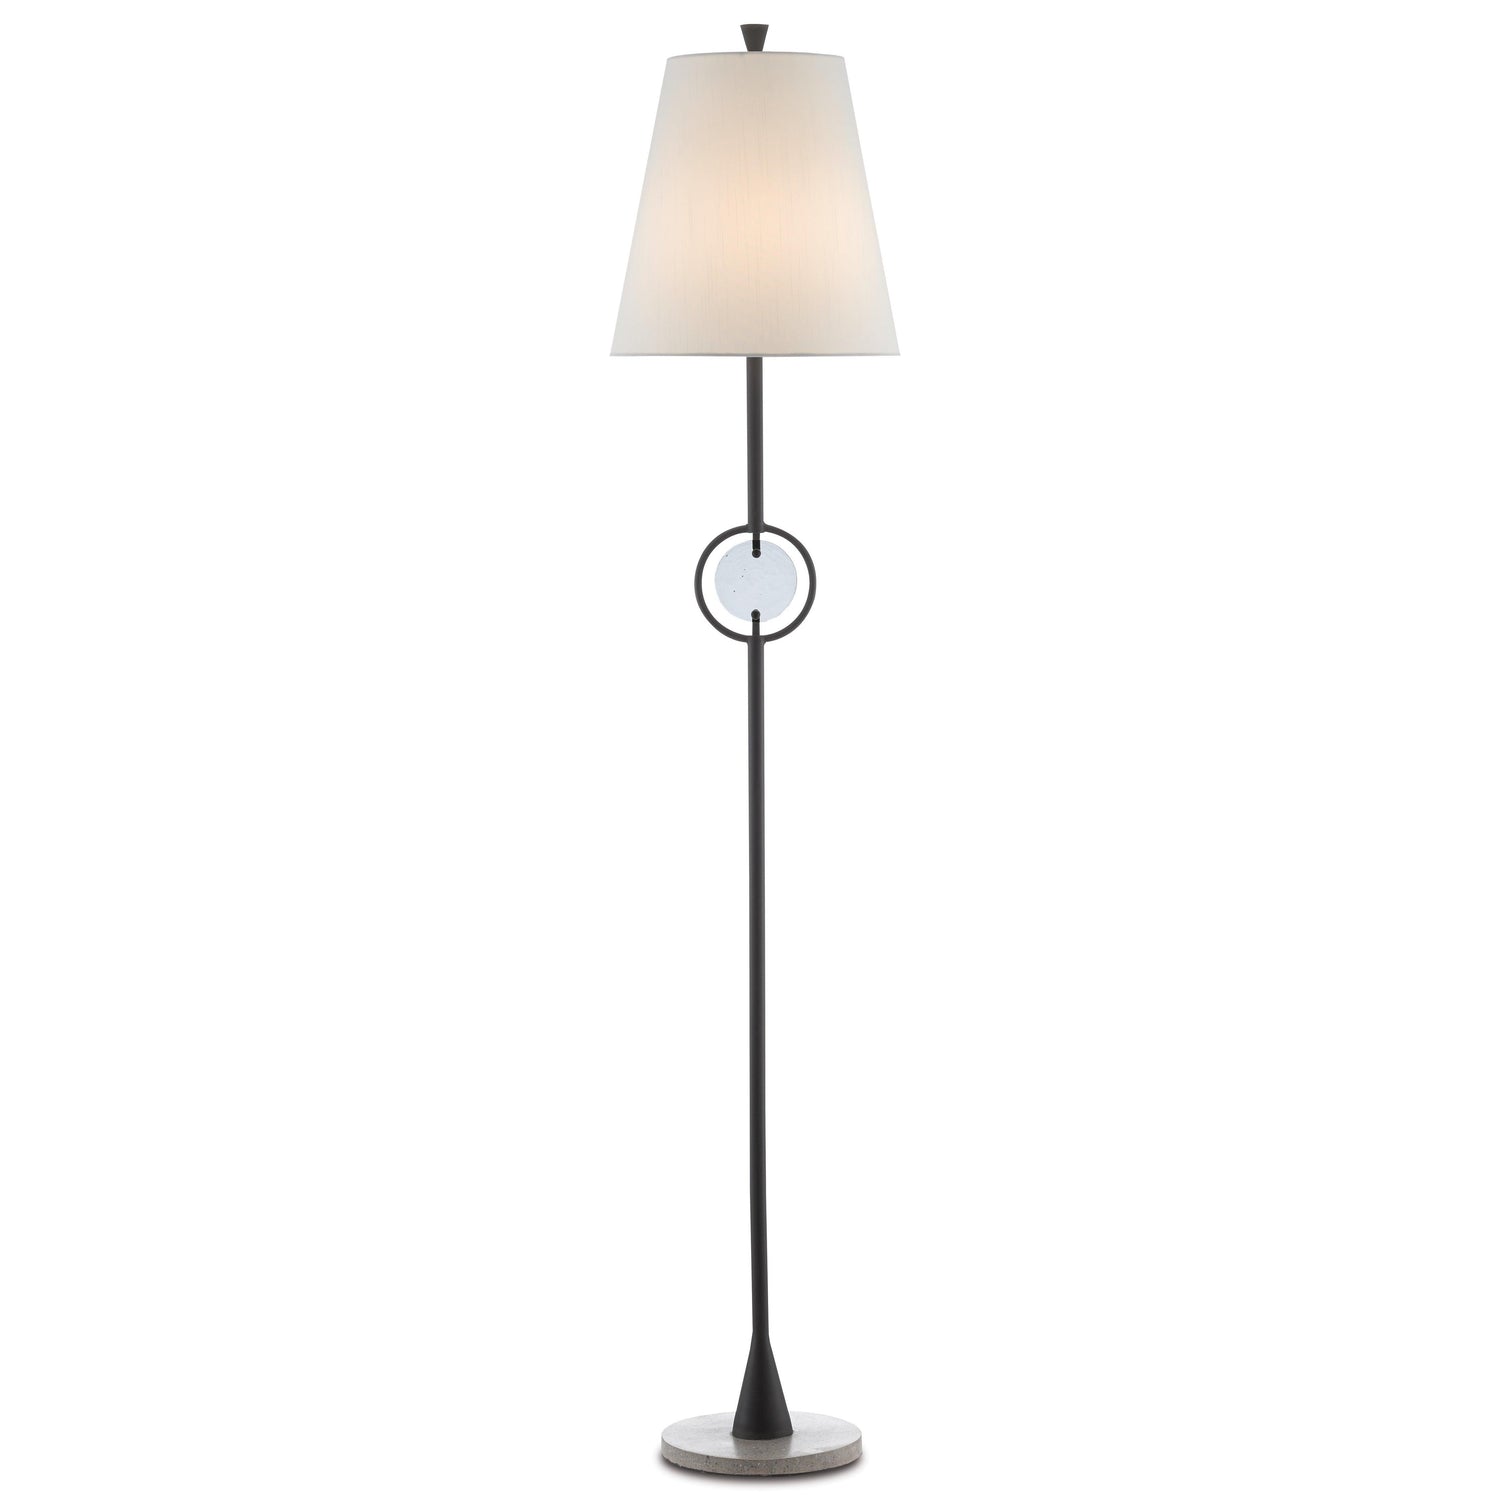 Currey and Company - Privateer Floor Lamp - 8000-0089 | Montreal Lighting & Hardware